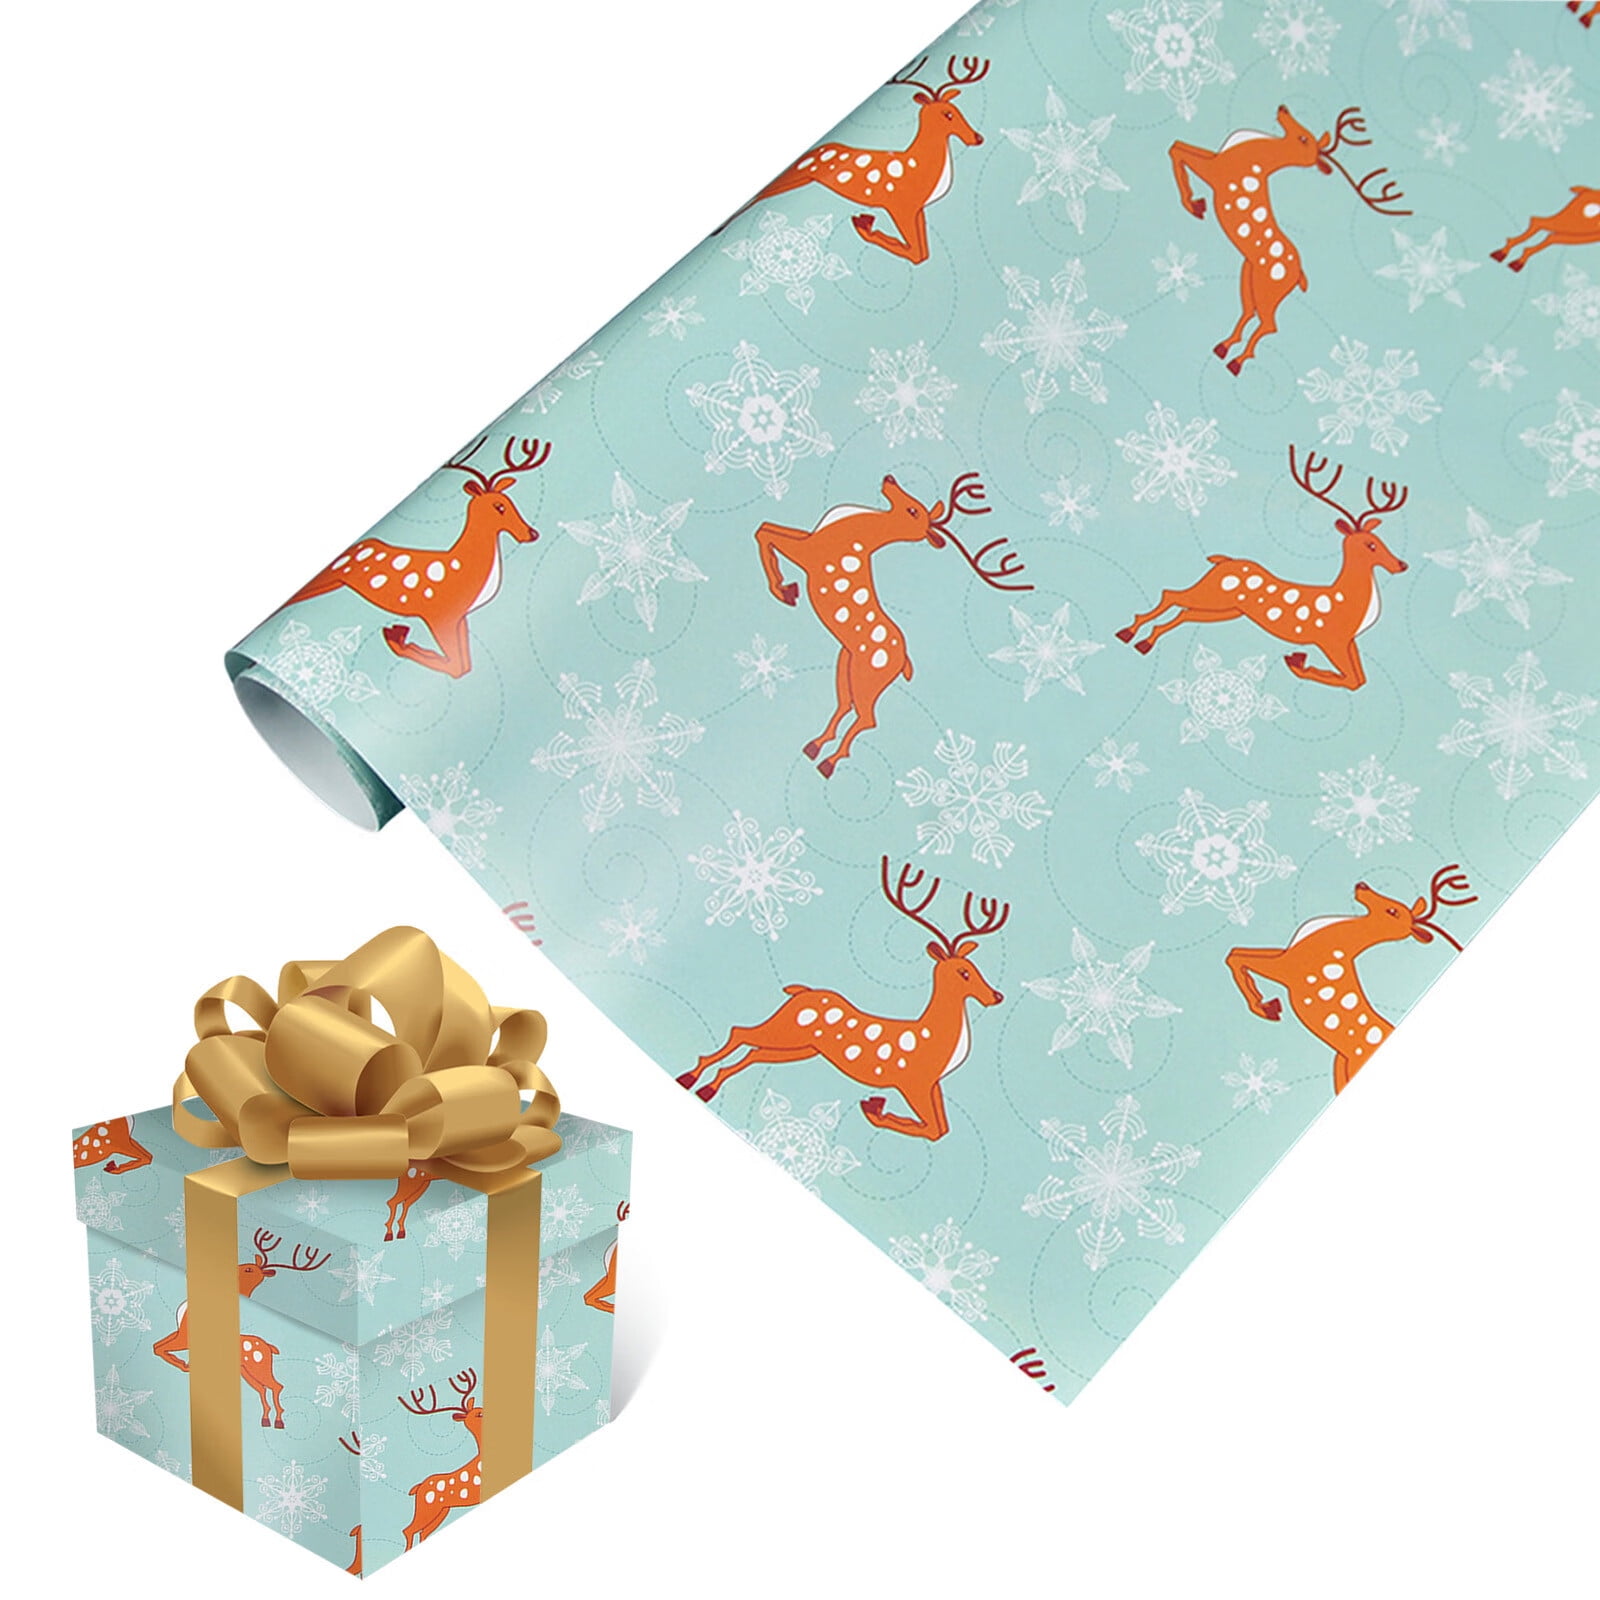 MaidMAX 42 inch Christmas Wrapping Paper Storage Bag, with Pockets for  Storing Rolls, Ribbons, Bows 